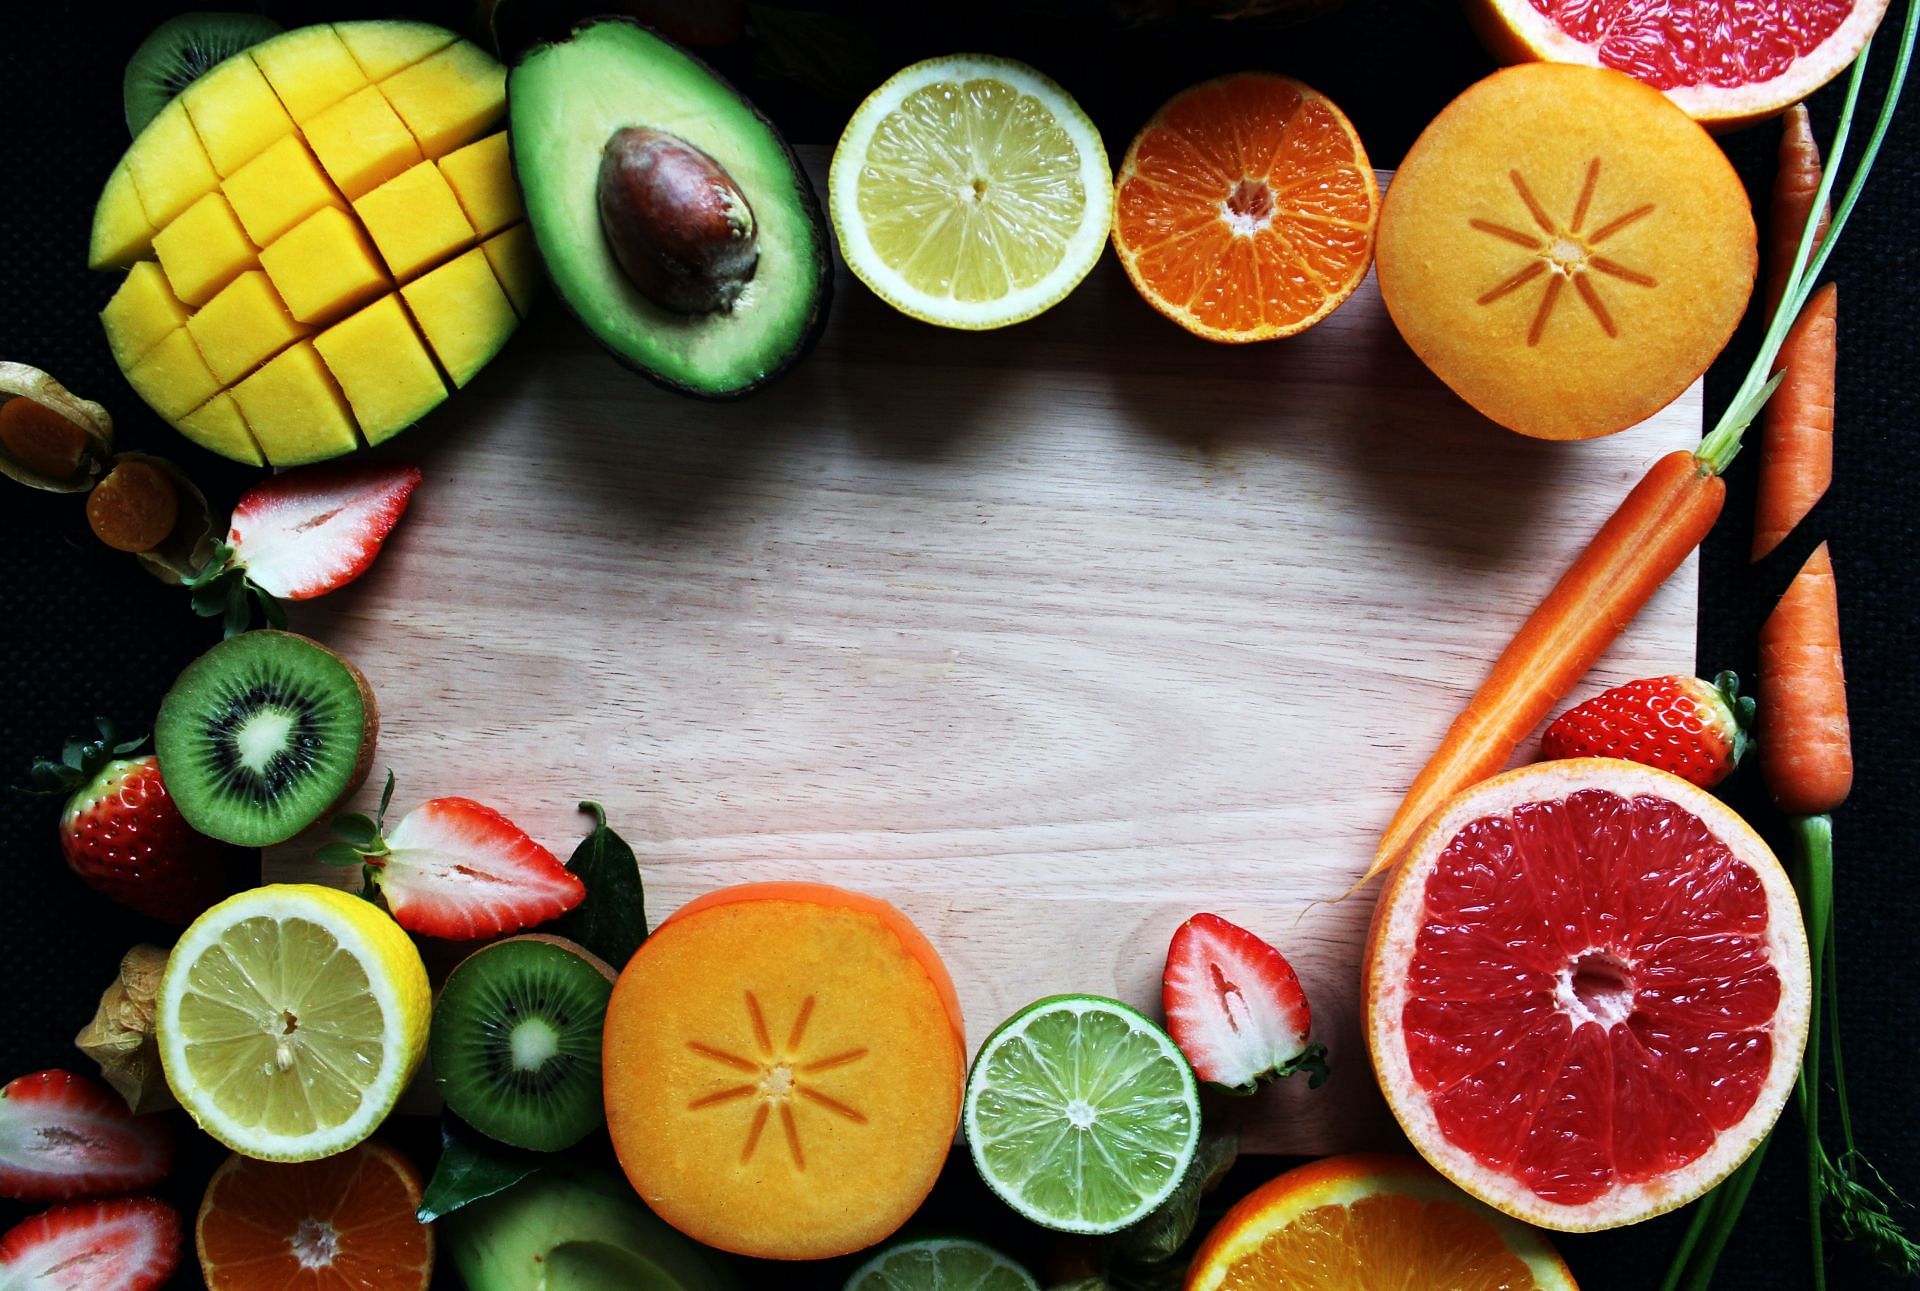 Low-calorie fruits are ideal for a liquid diet for weight loss (Image via Unsplash/Amoon Ra)